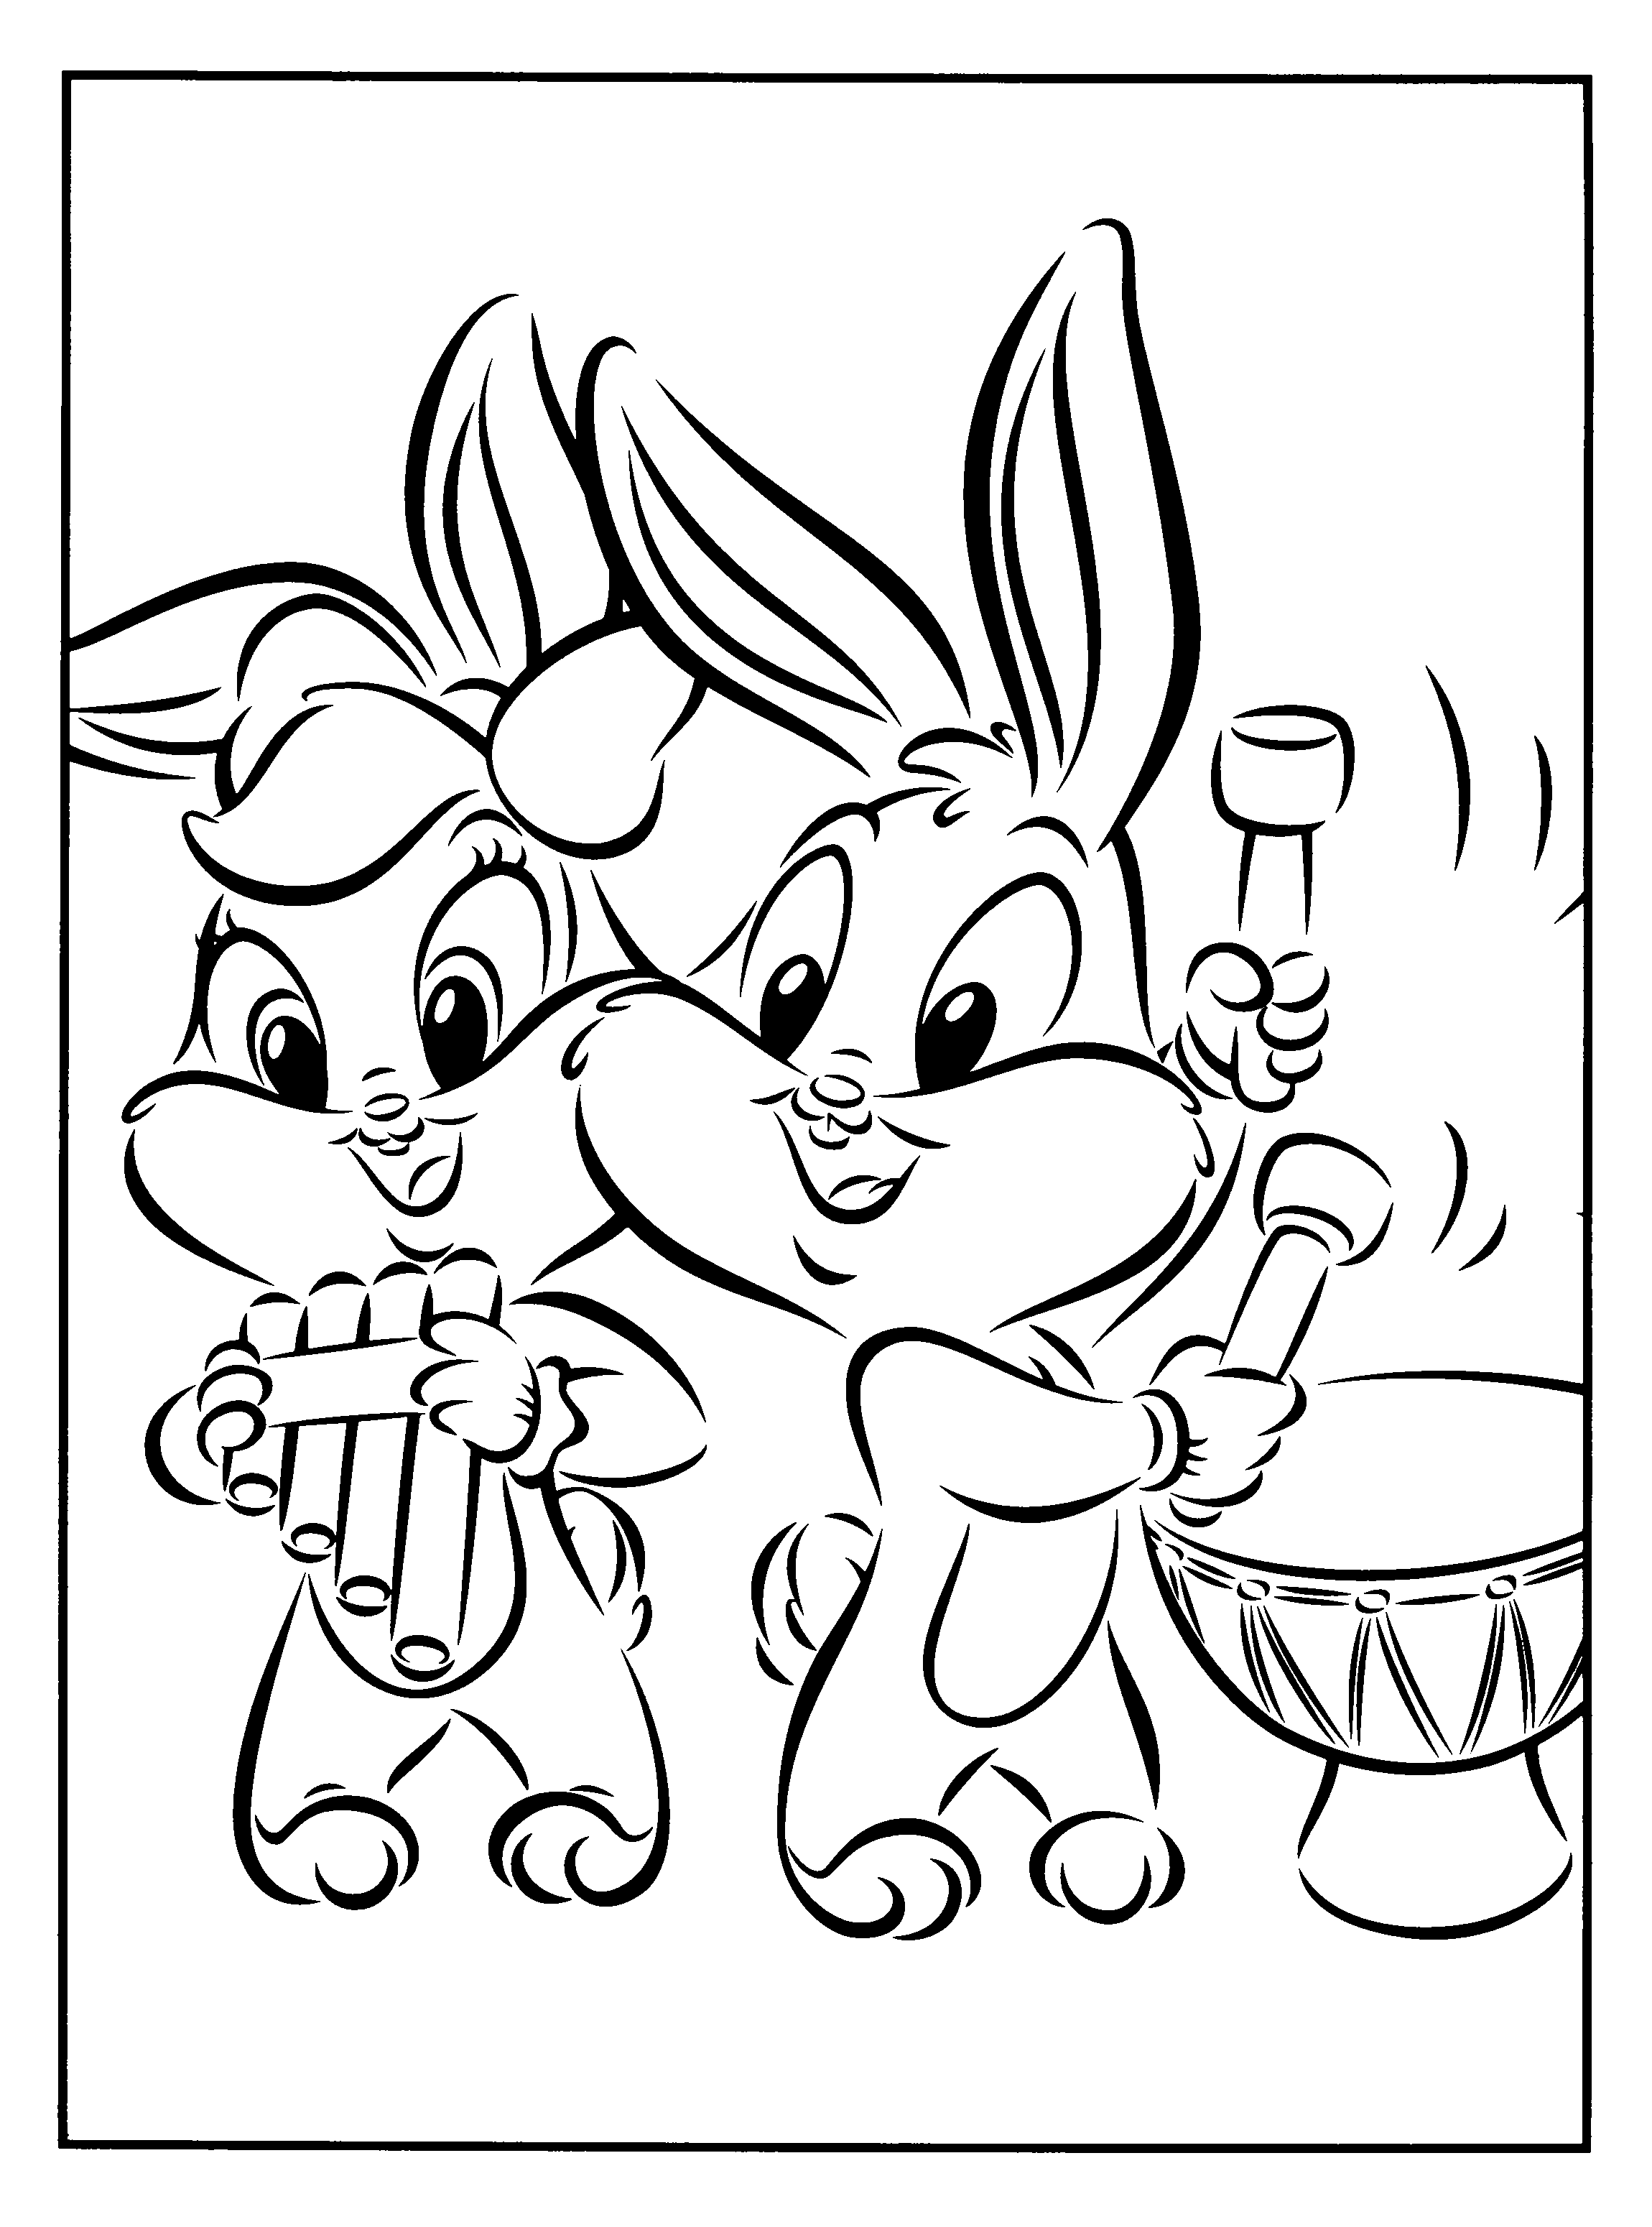 Looney tunes coloring pages